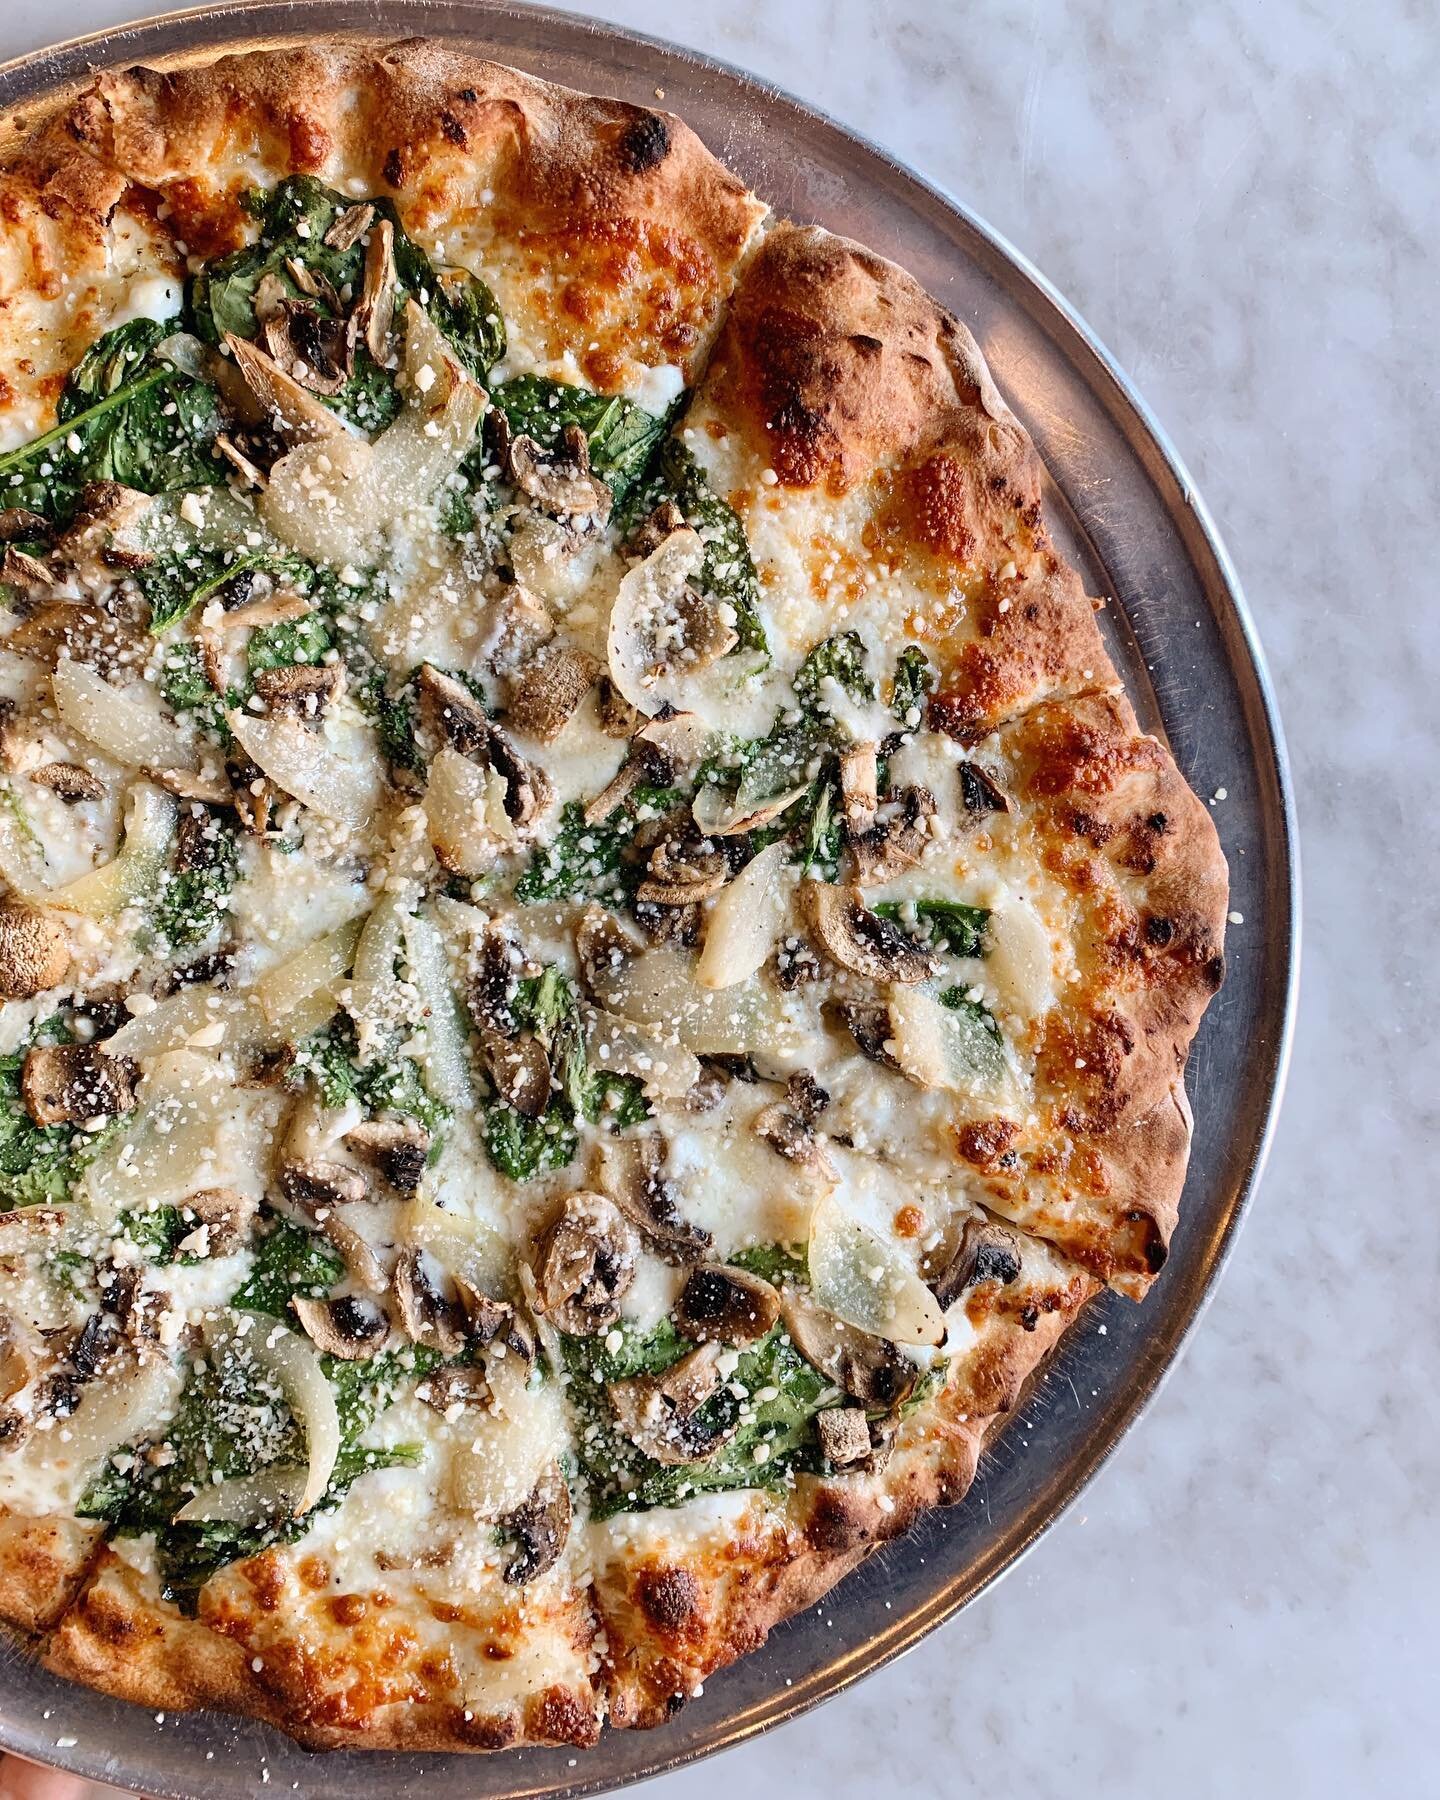 Happy Saturday!! We open at noon at @thepamarket for specialty pies 🍕 Grab a cocktail or 2 to start off your weekend right 🙌💥

📸: White Pizza // Fresh Mushrooms, Spinach, Caramelized Onion, Truffle Oil